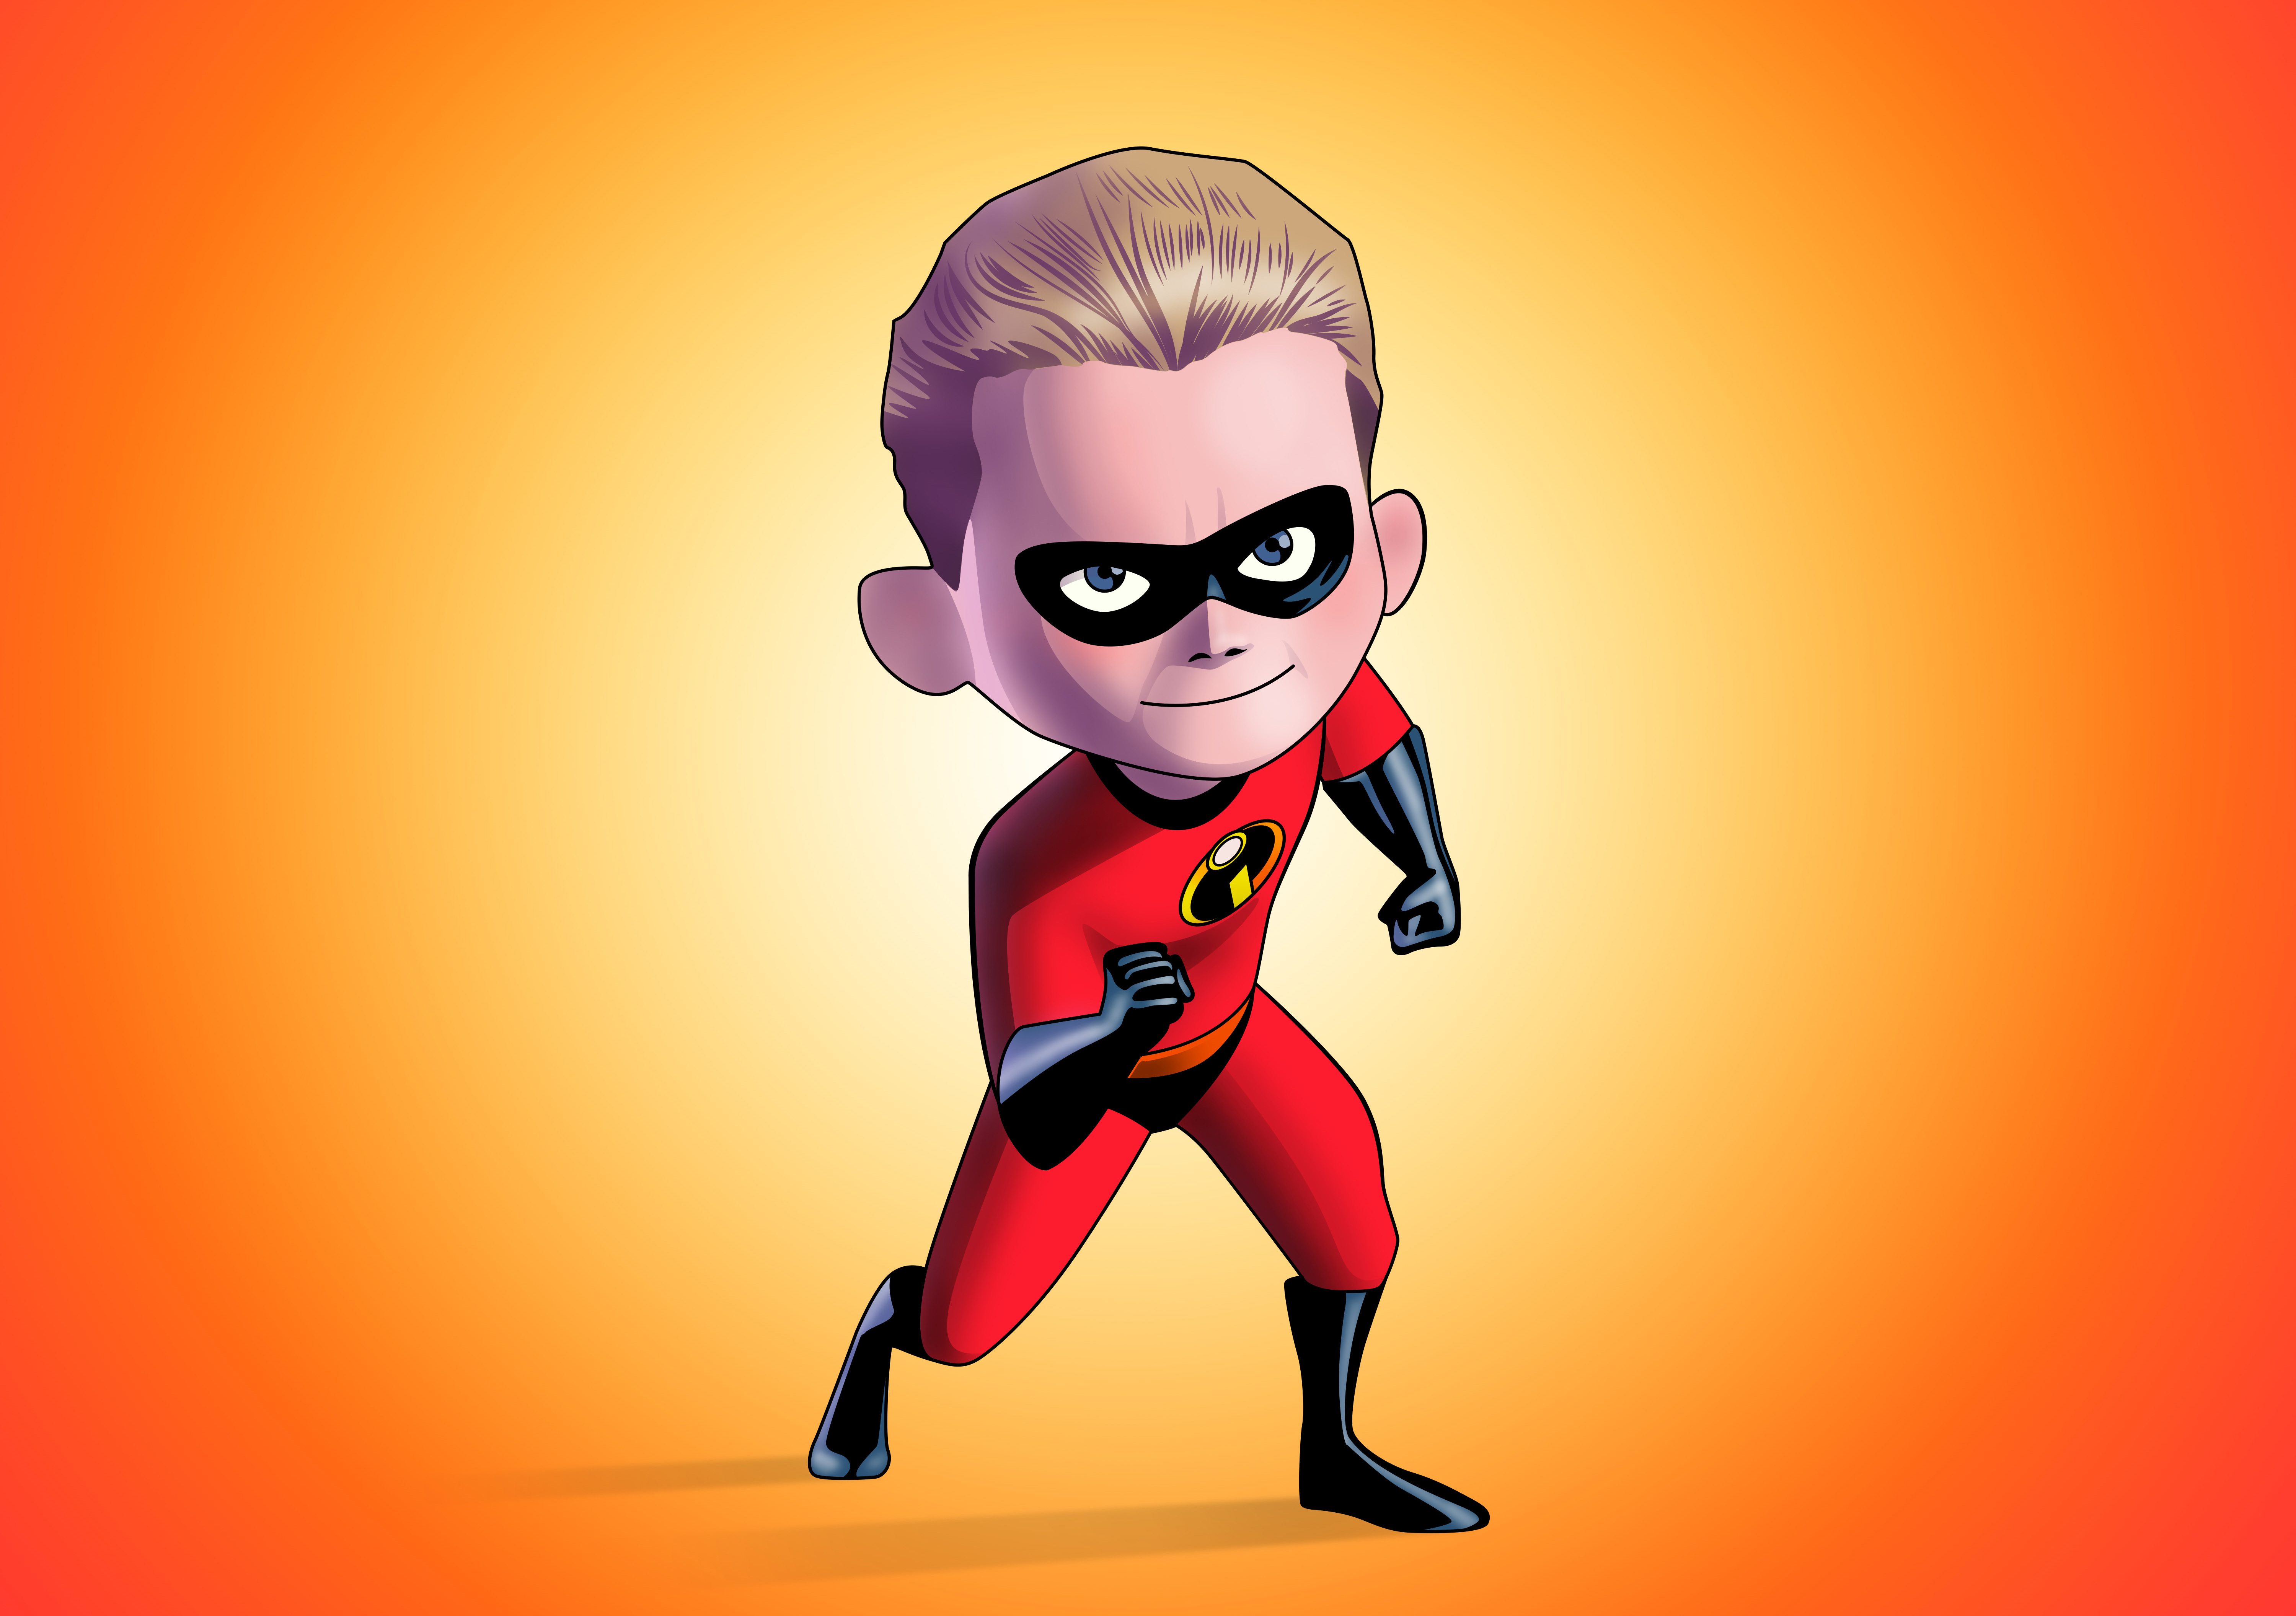 instal the last version for android Incredibles 2